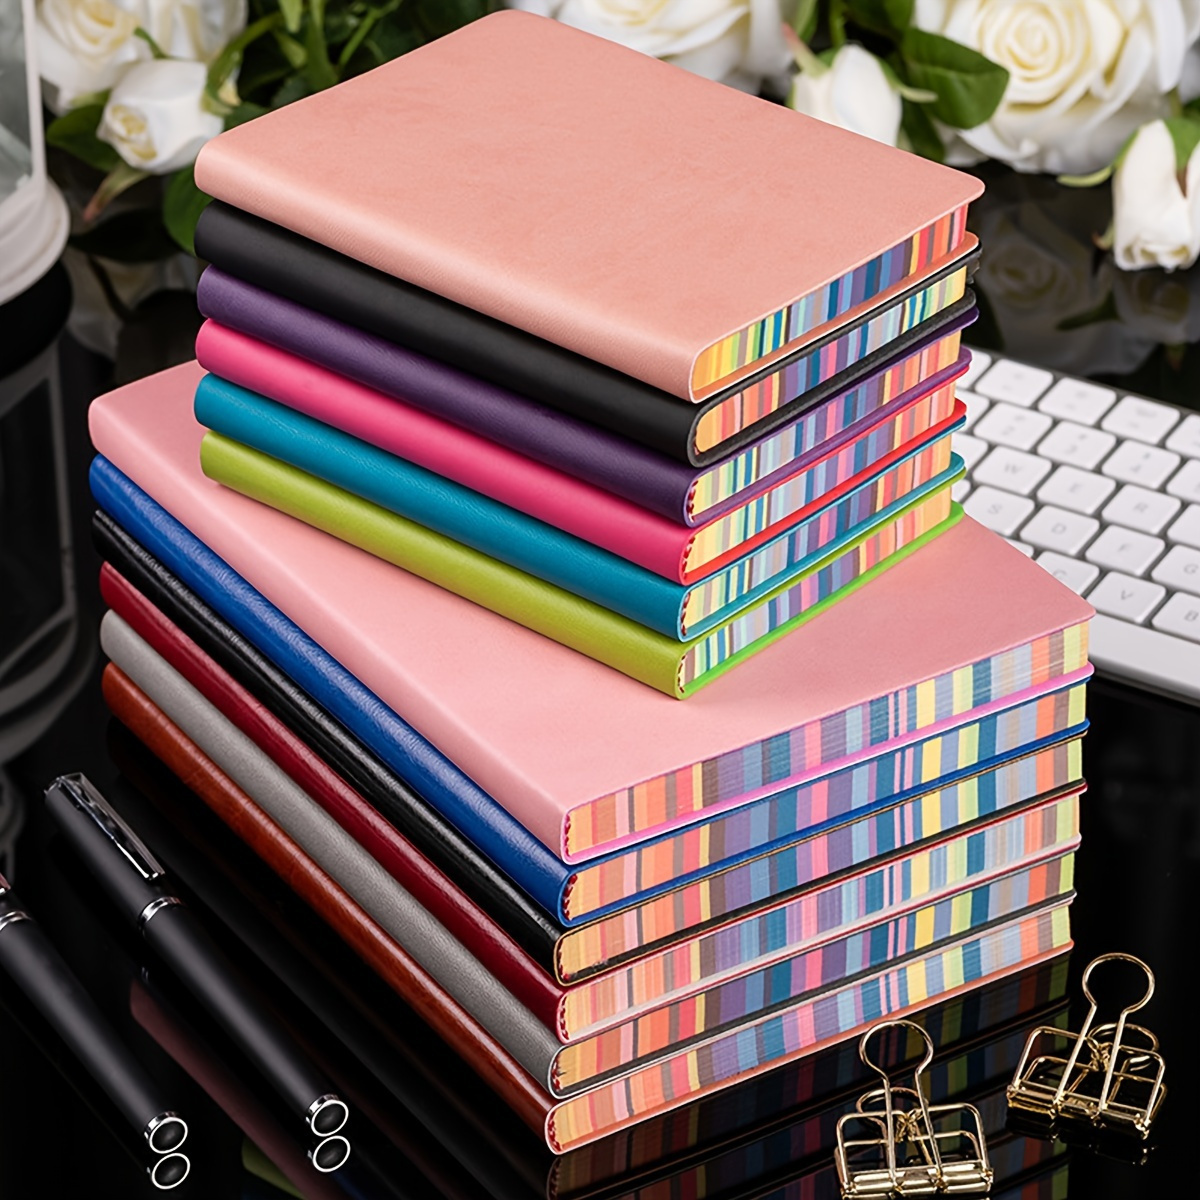 

1pc A5/a6 Cute Leather Notebook With Rainbow Border 100 Sheets Lined Papers For Student Record Drawing Excerpt School Office Rose Red/blue/green/black